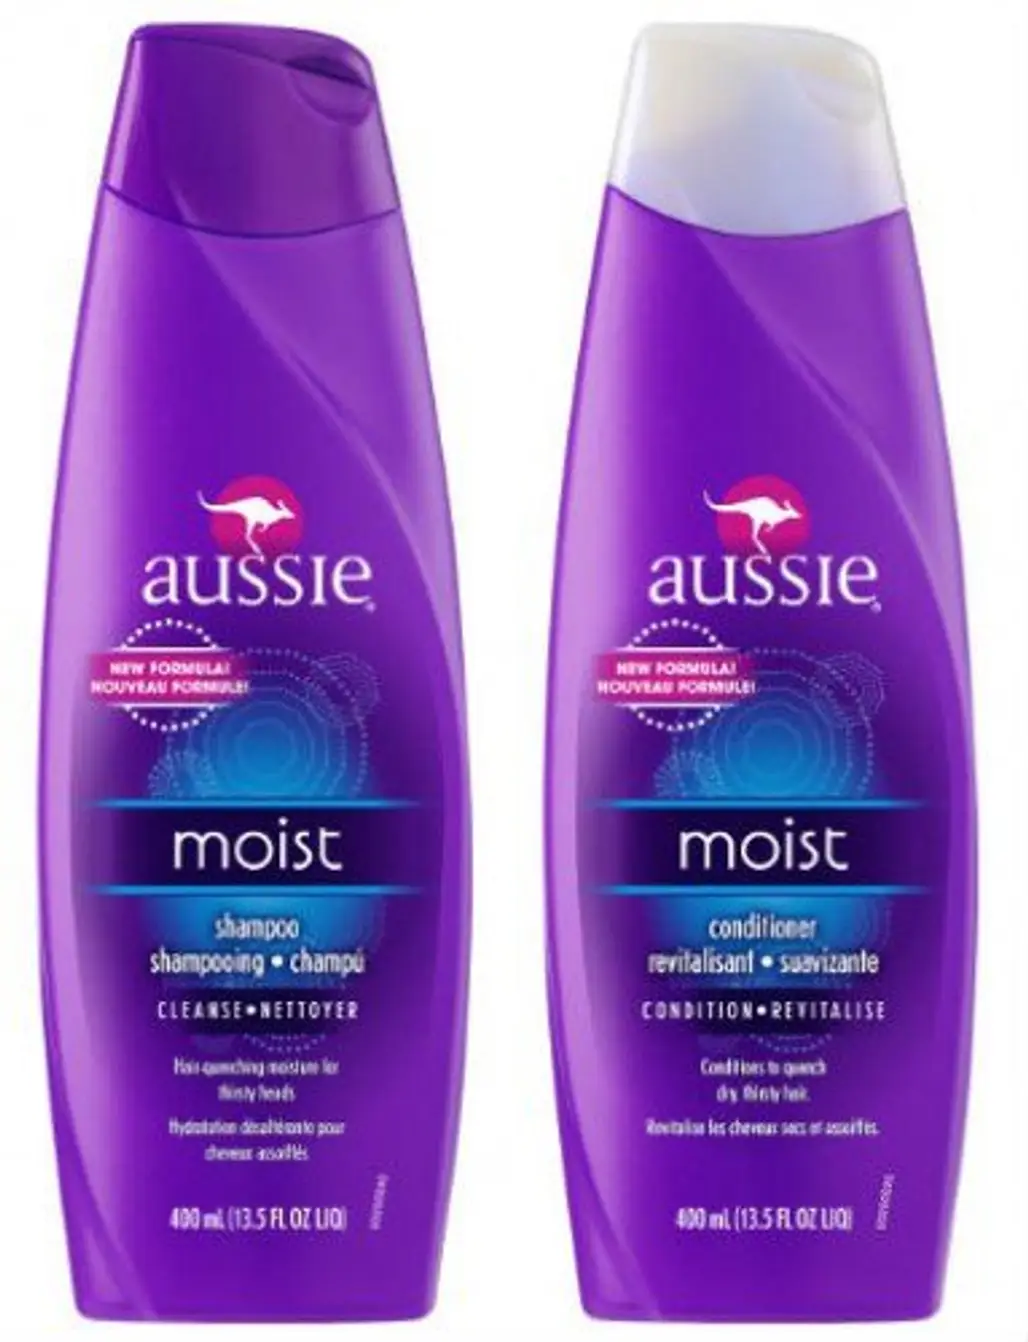 Aussie Moist Shampoo and Conditioner for Dry Hair